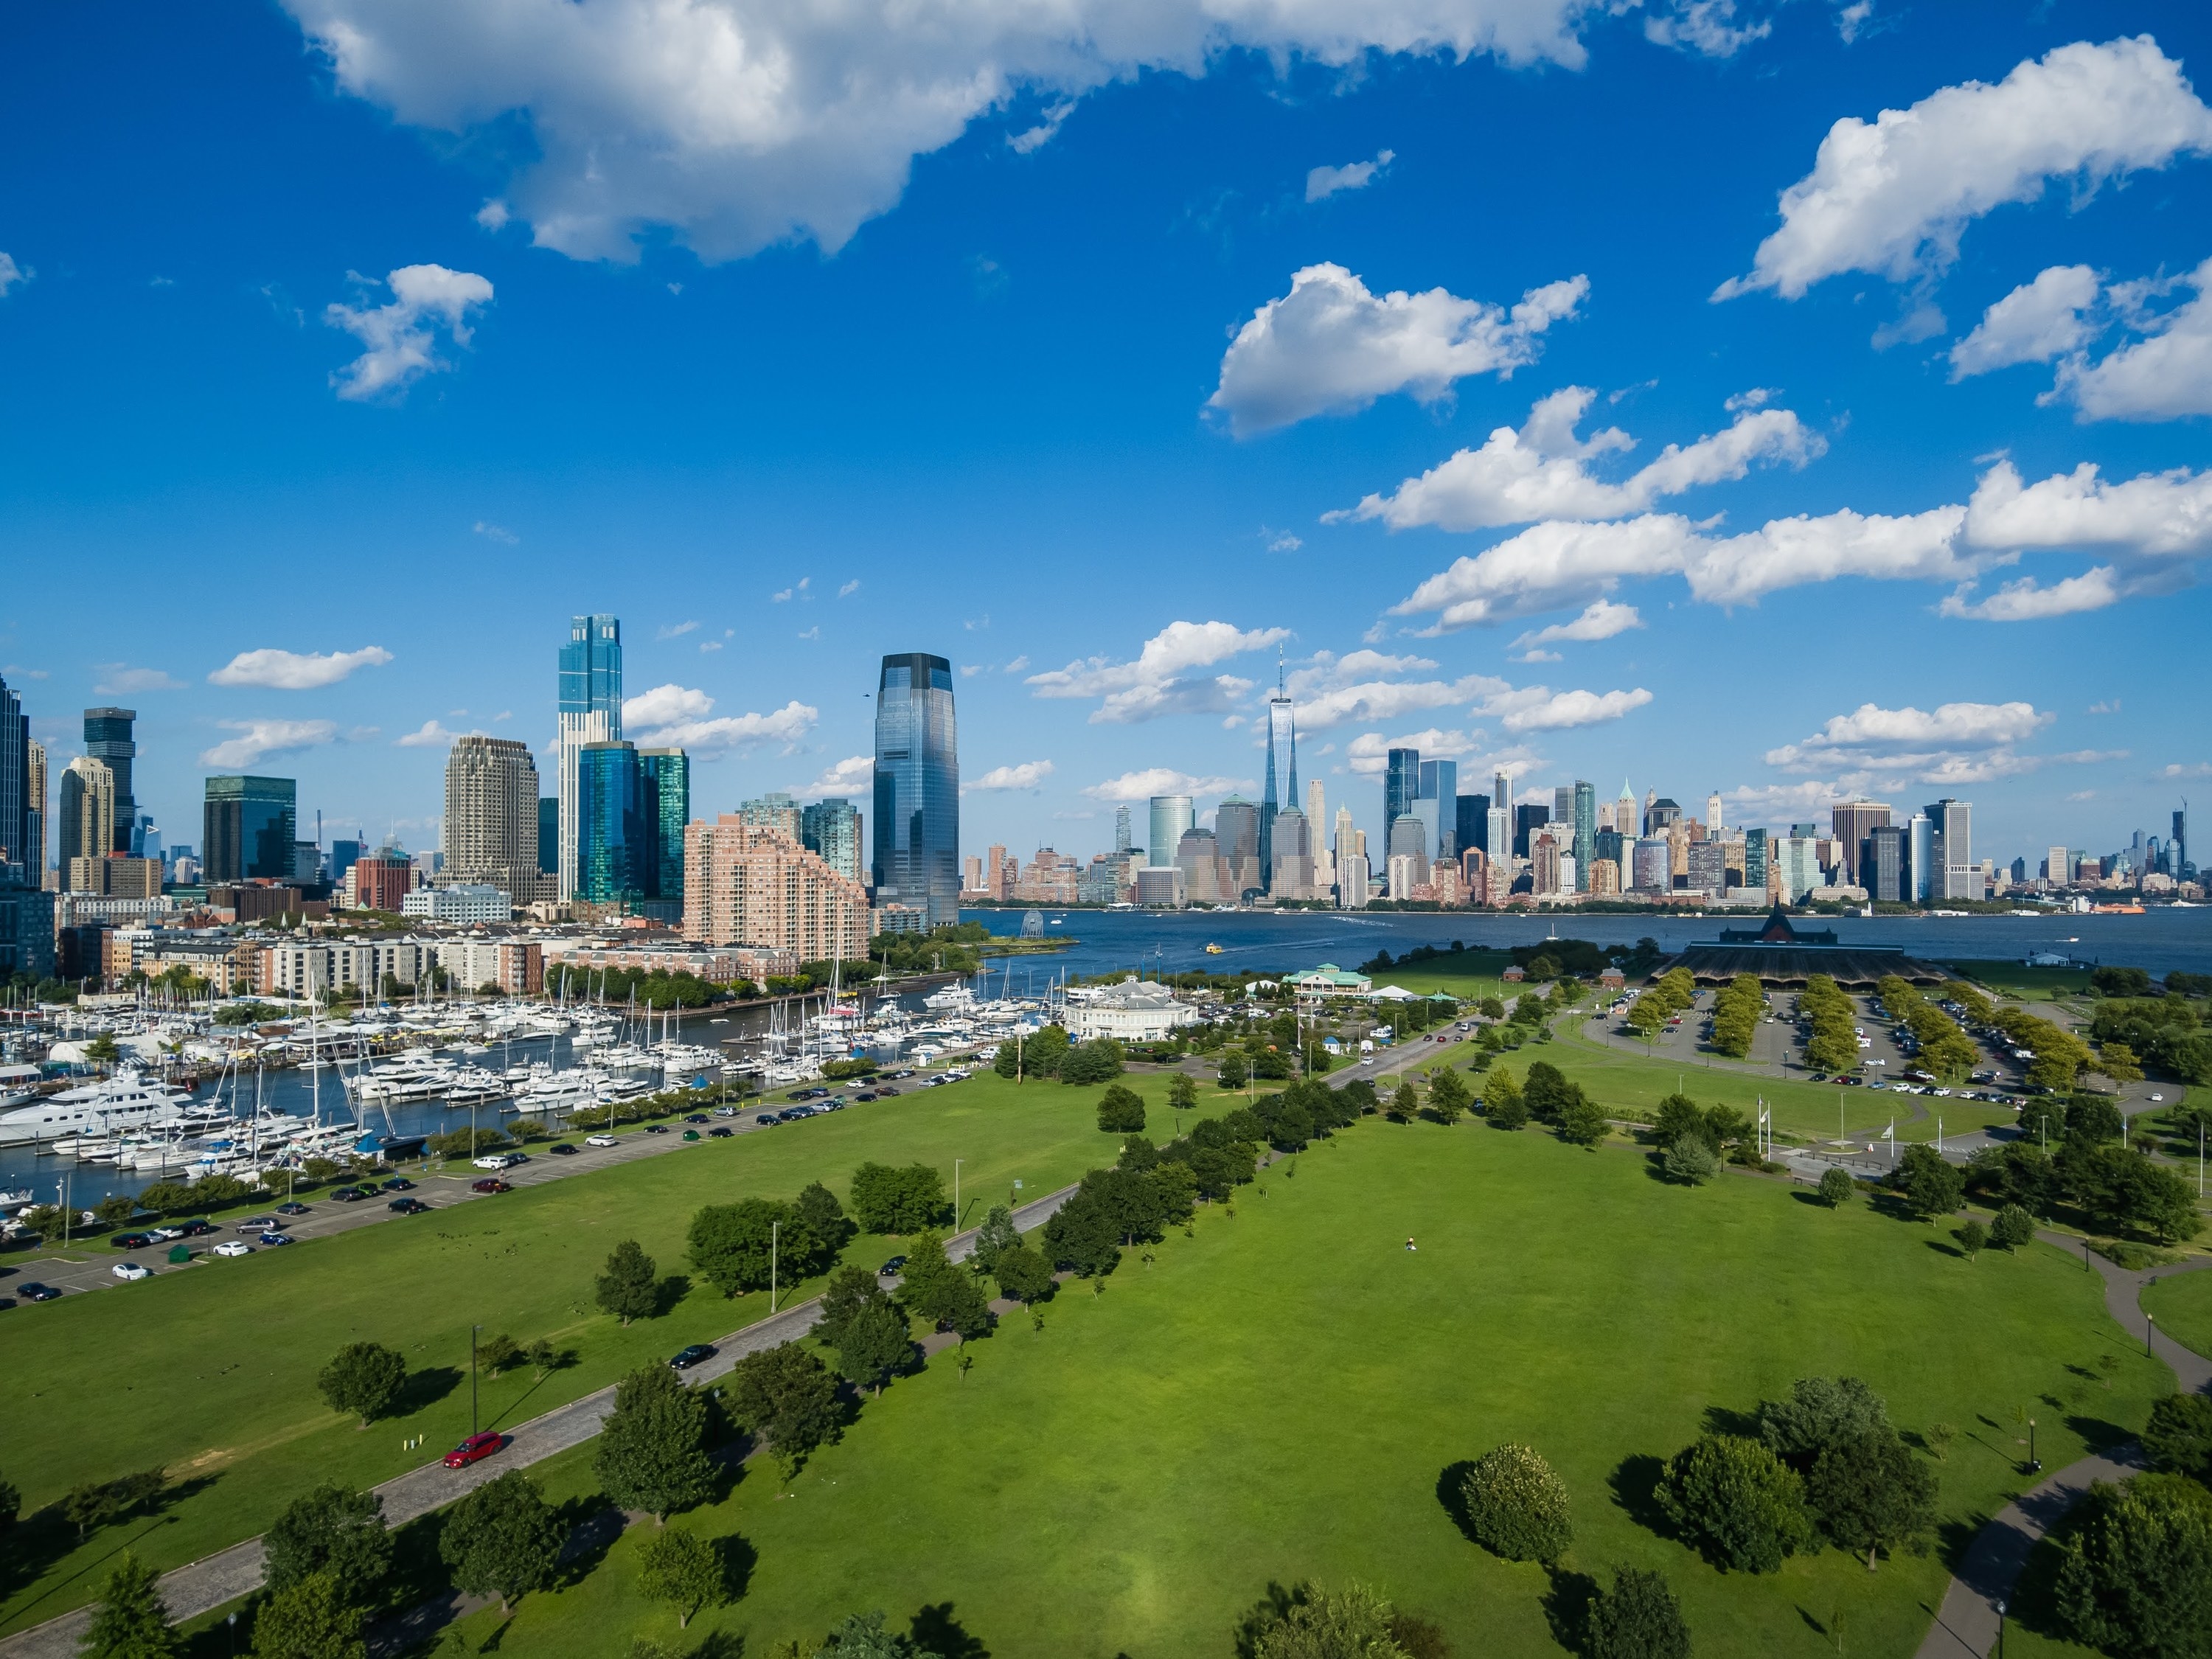 Greenery in Jersey City, New Jersey with a view of the NYC skyline in the background